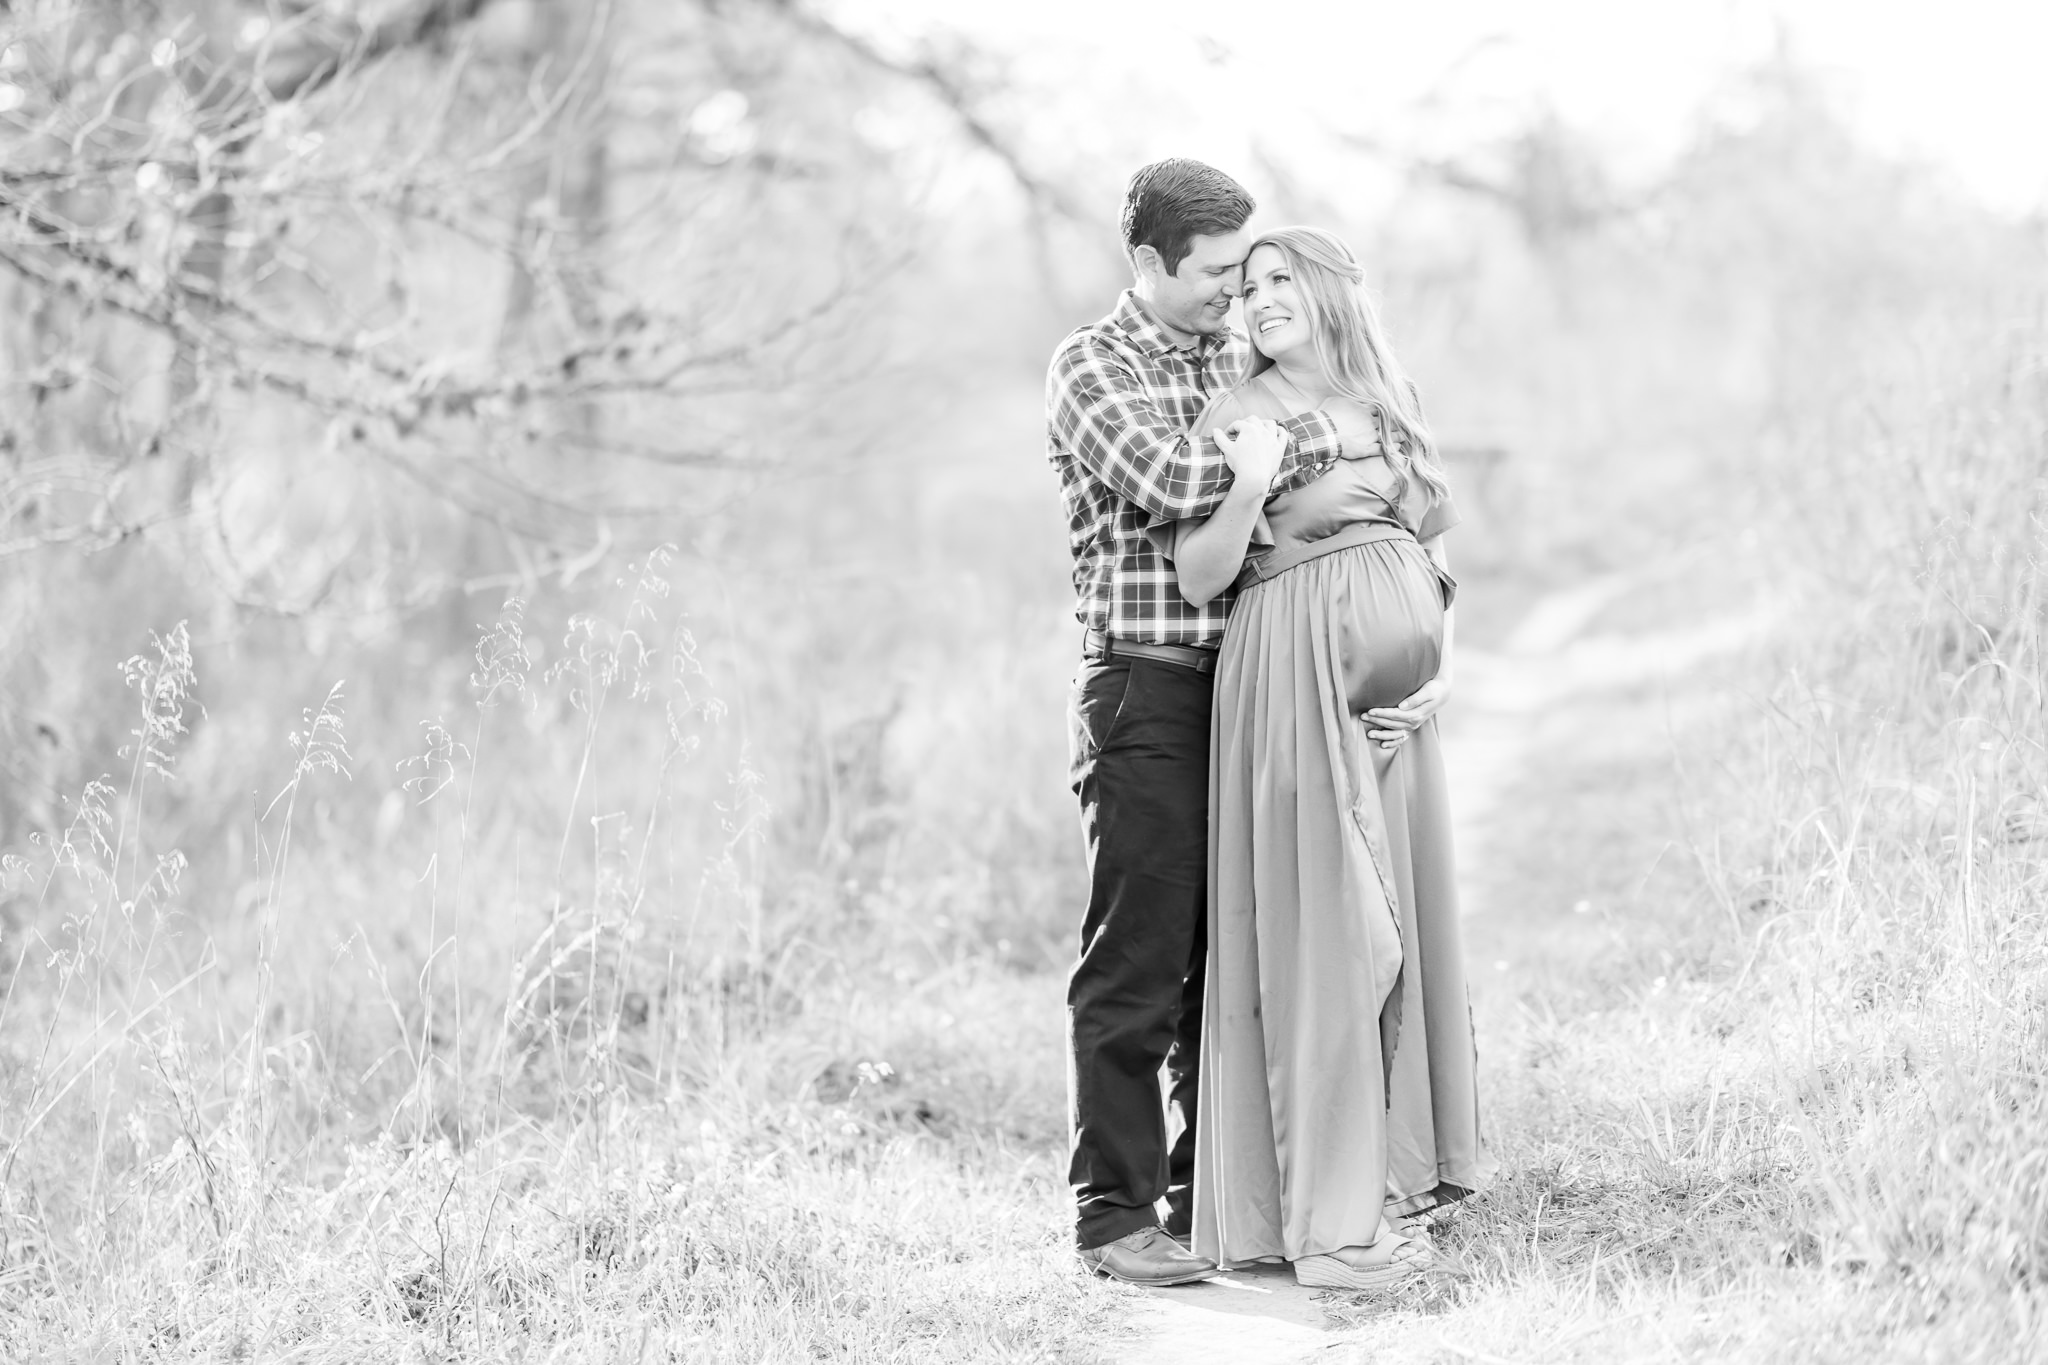 Maternity sessions that strengthens bonds within families Planner  @southernsauce__ Photographer @slgstudios